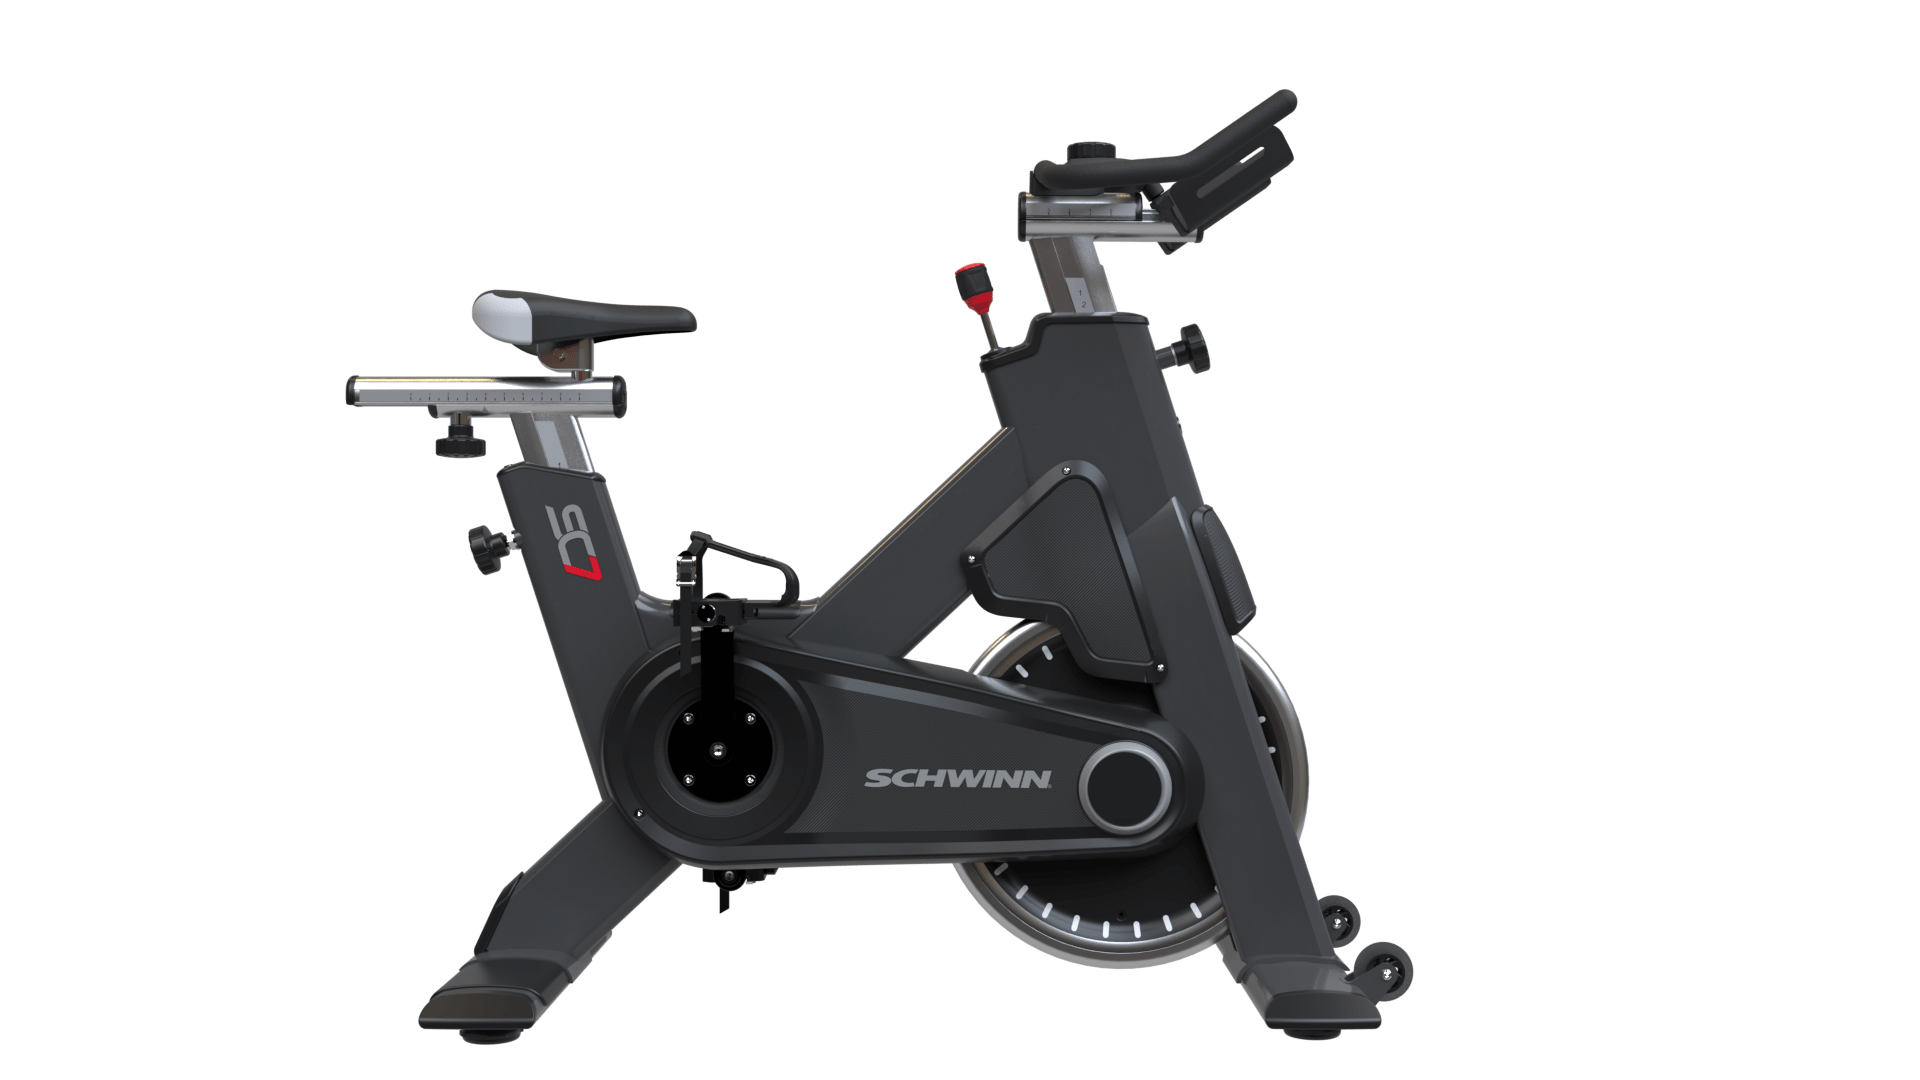 Schwinn SC7 Indoor Bike-Call 888-502-2348 Now For Lowest Pricing - Gym Pros